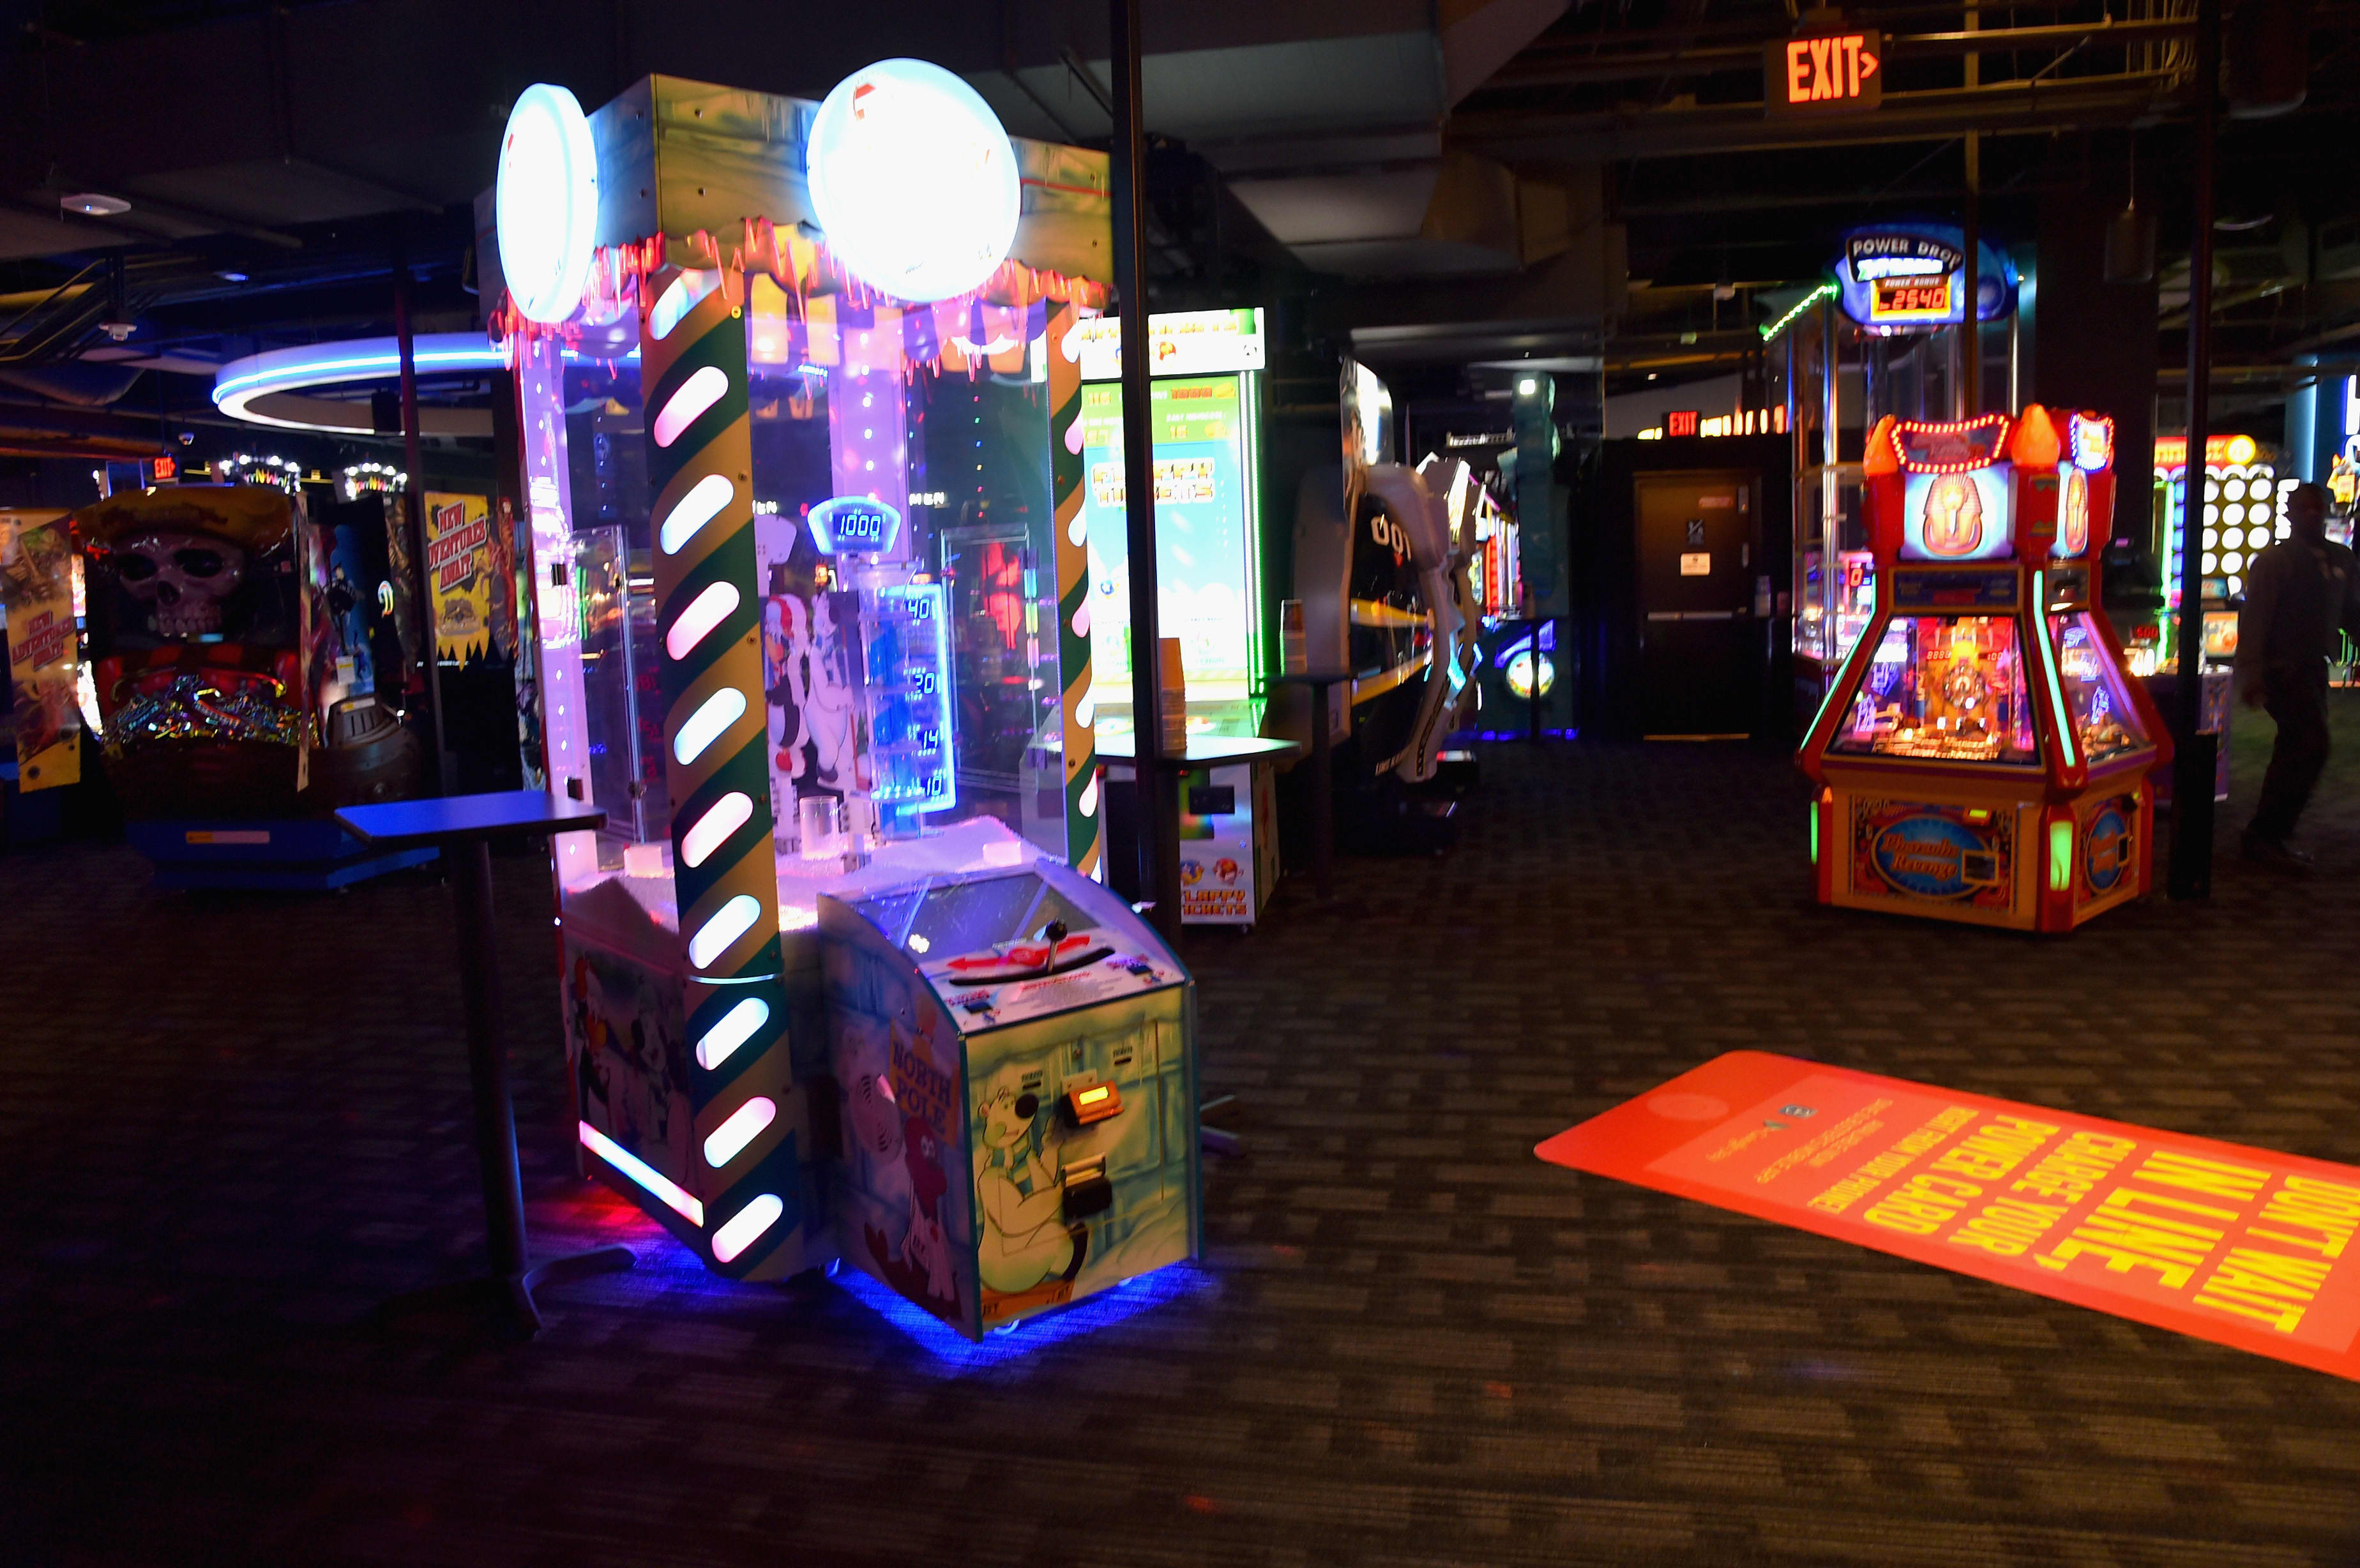 Dave & Buster's (@daveandbusters) • Instagram photos and videos